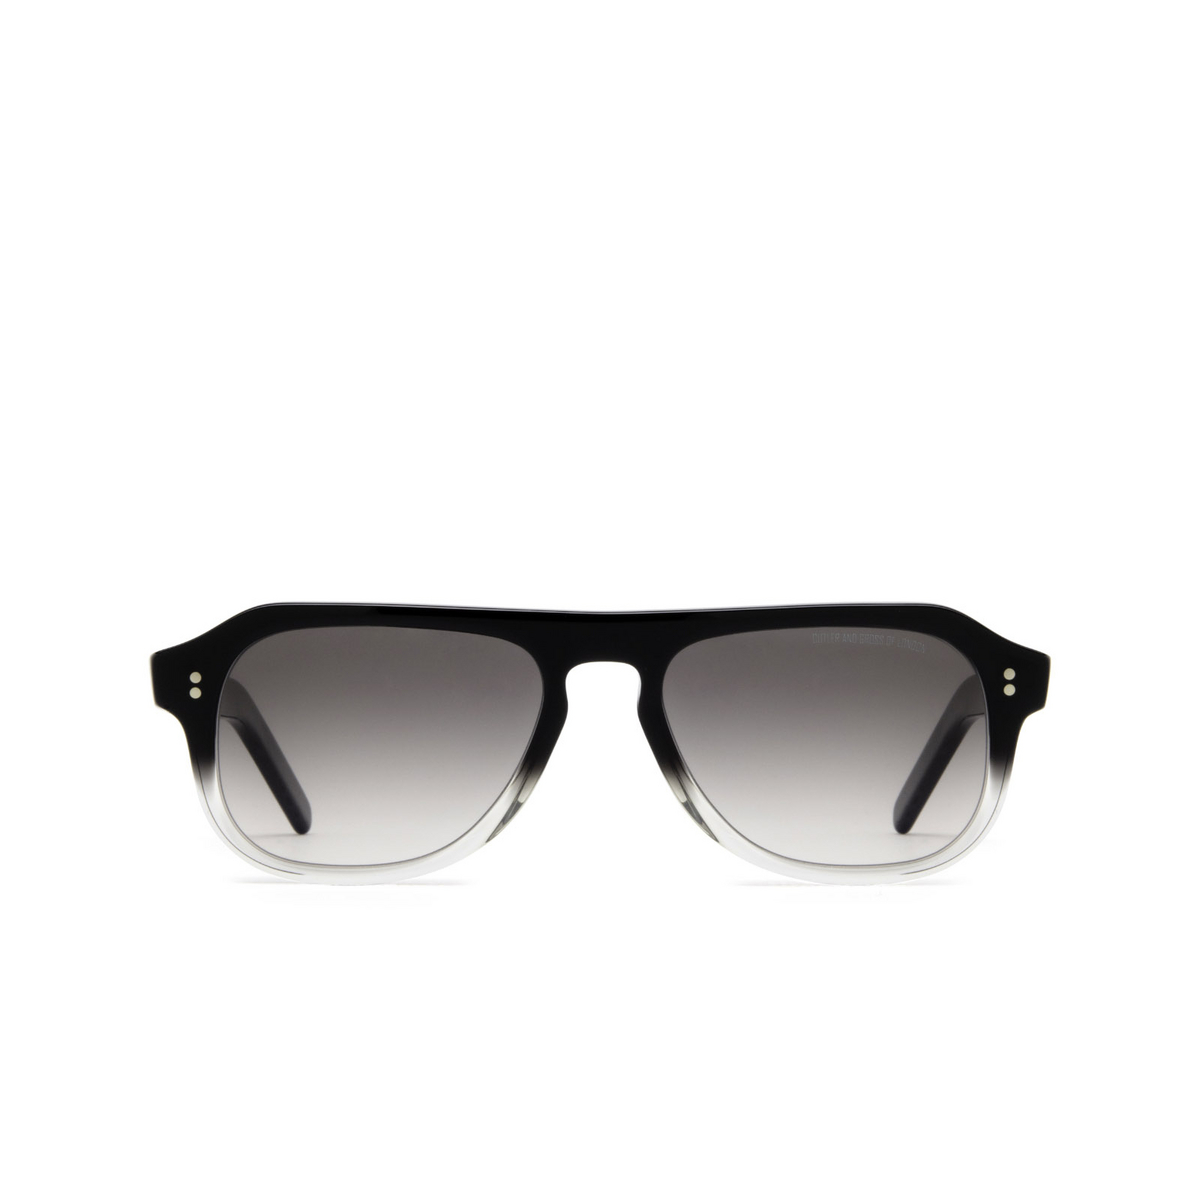 Cutler and Gross 0822V2 Sunglasses BCF Black To Clear Fade - front view